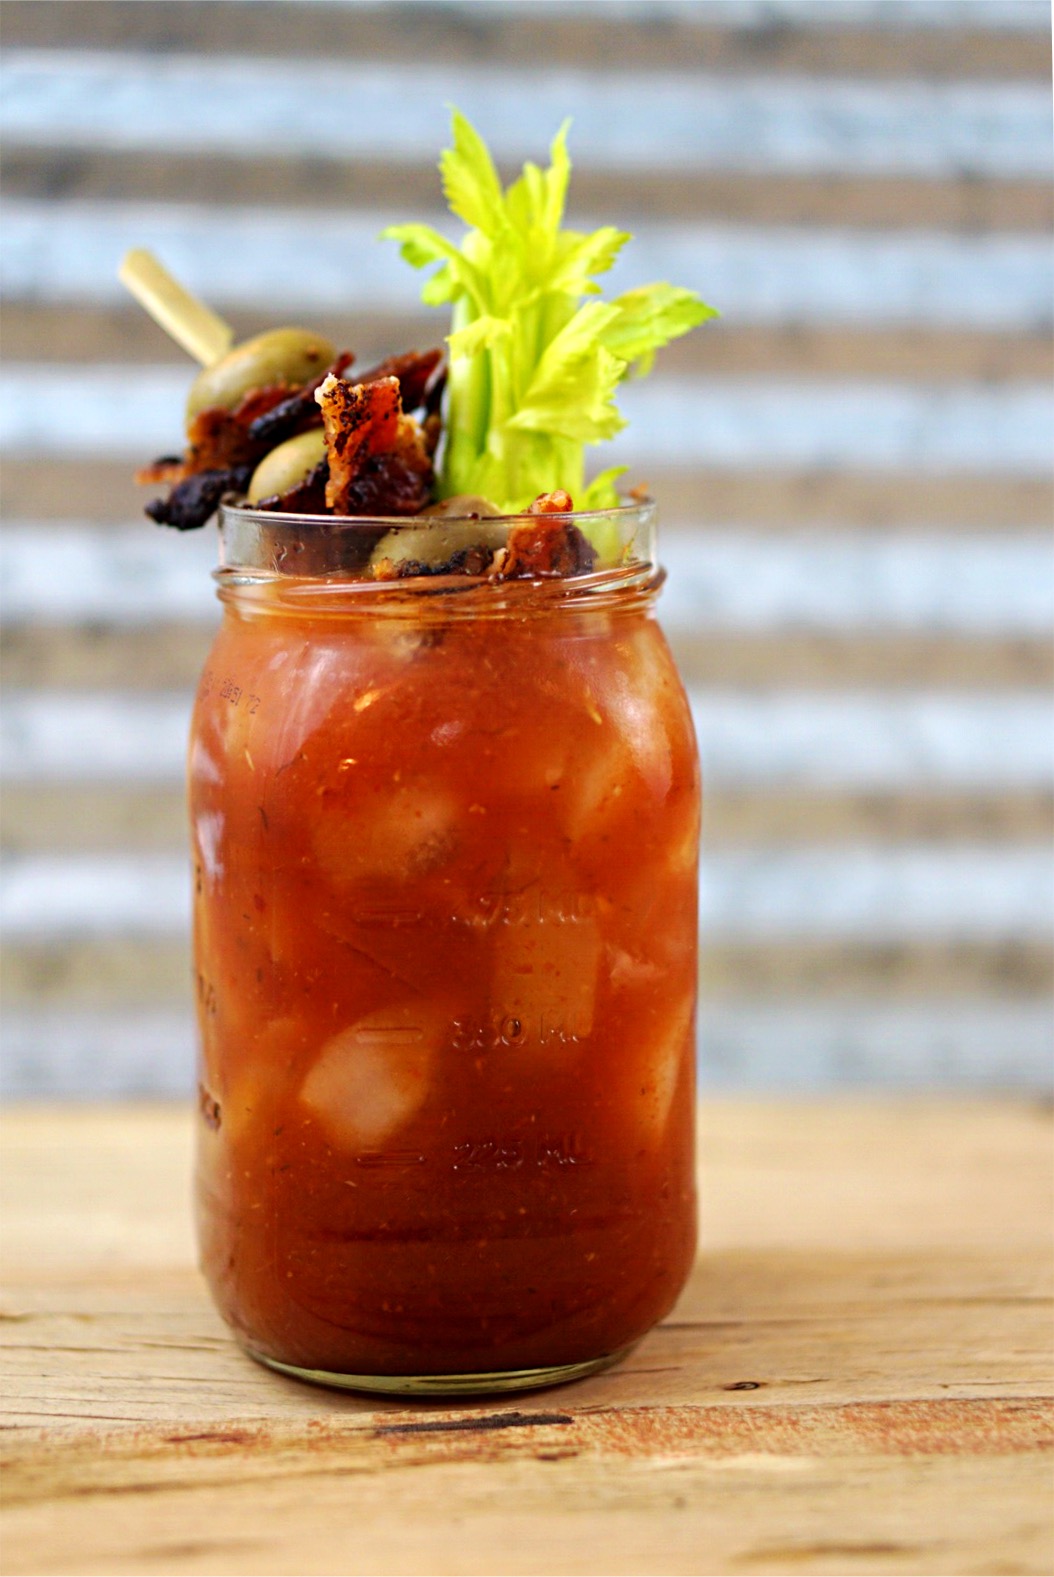 The world is falling in love with Smokin' Mary Bloody Mary Mix! It has layers of rich, smokey, perfectly spiced, flavors that come alive in your mouth! By Wet Whistle Drinks by Darla Bentley